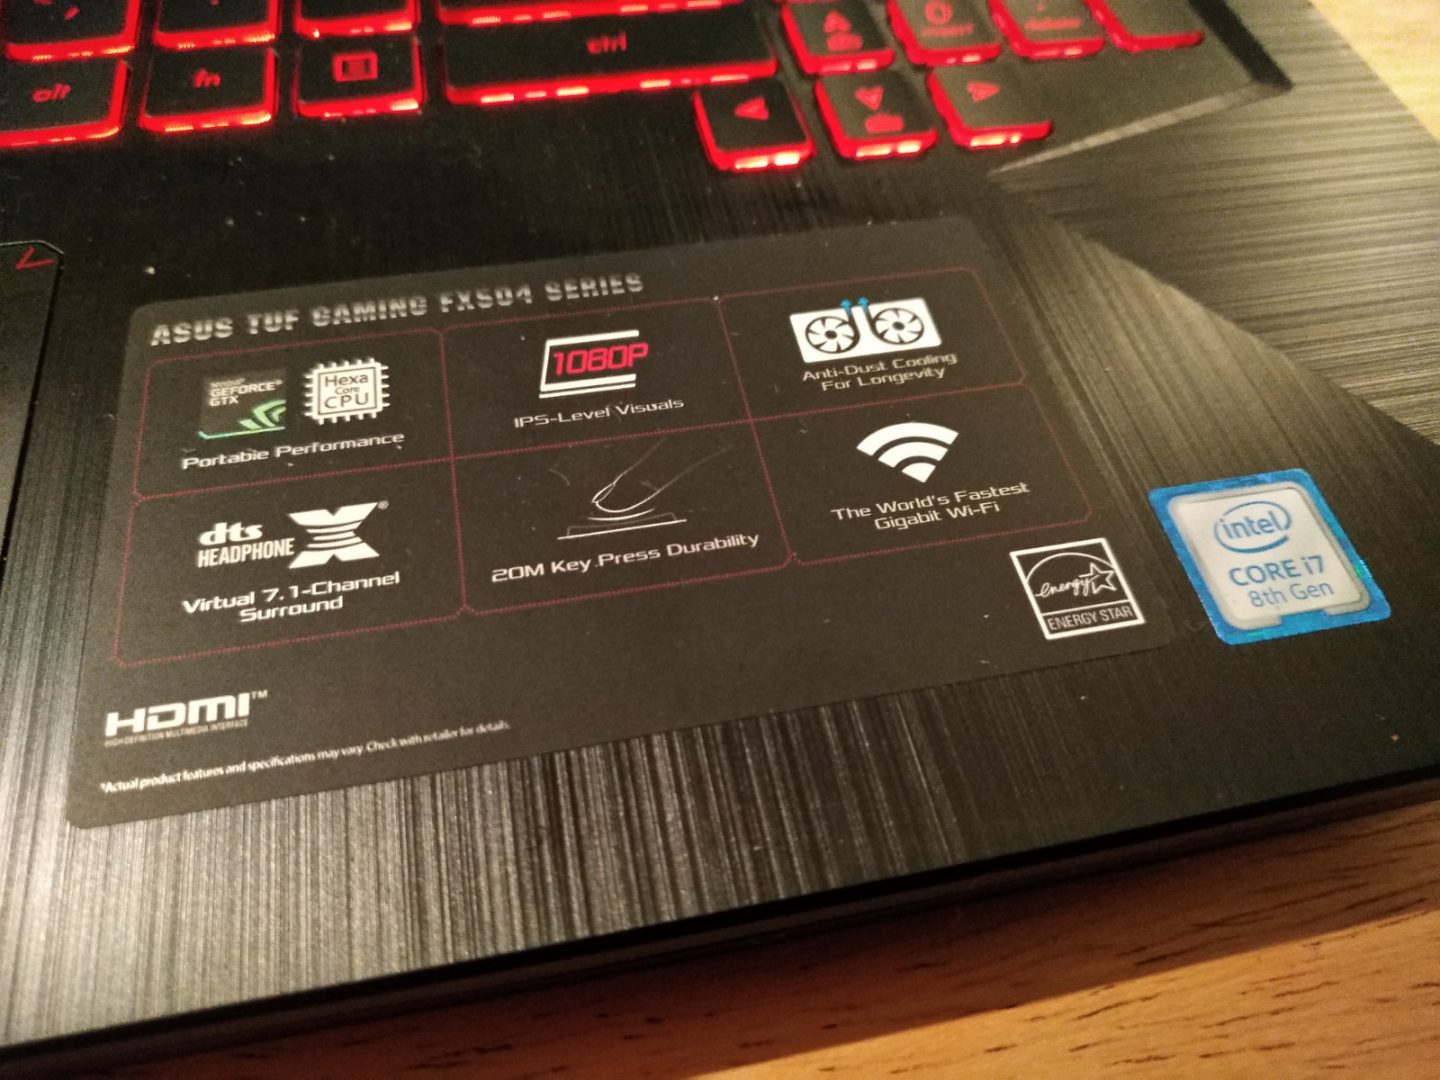 The Asus FX504 is far better than reviewers think